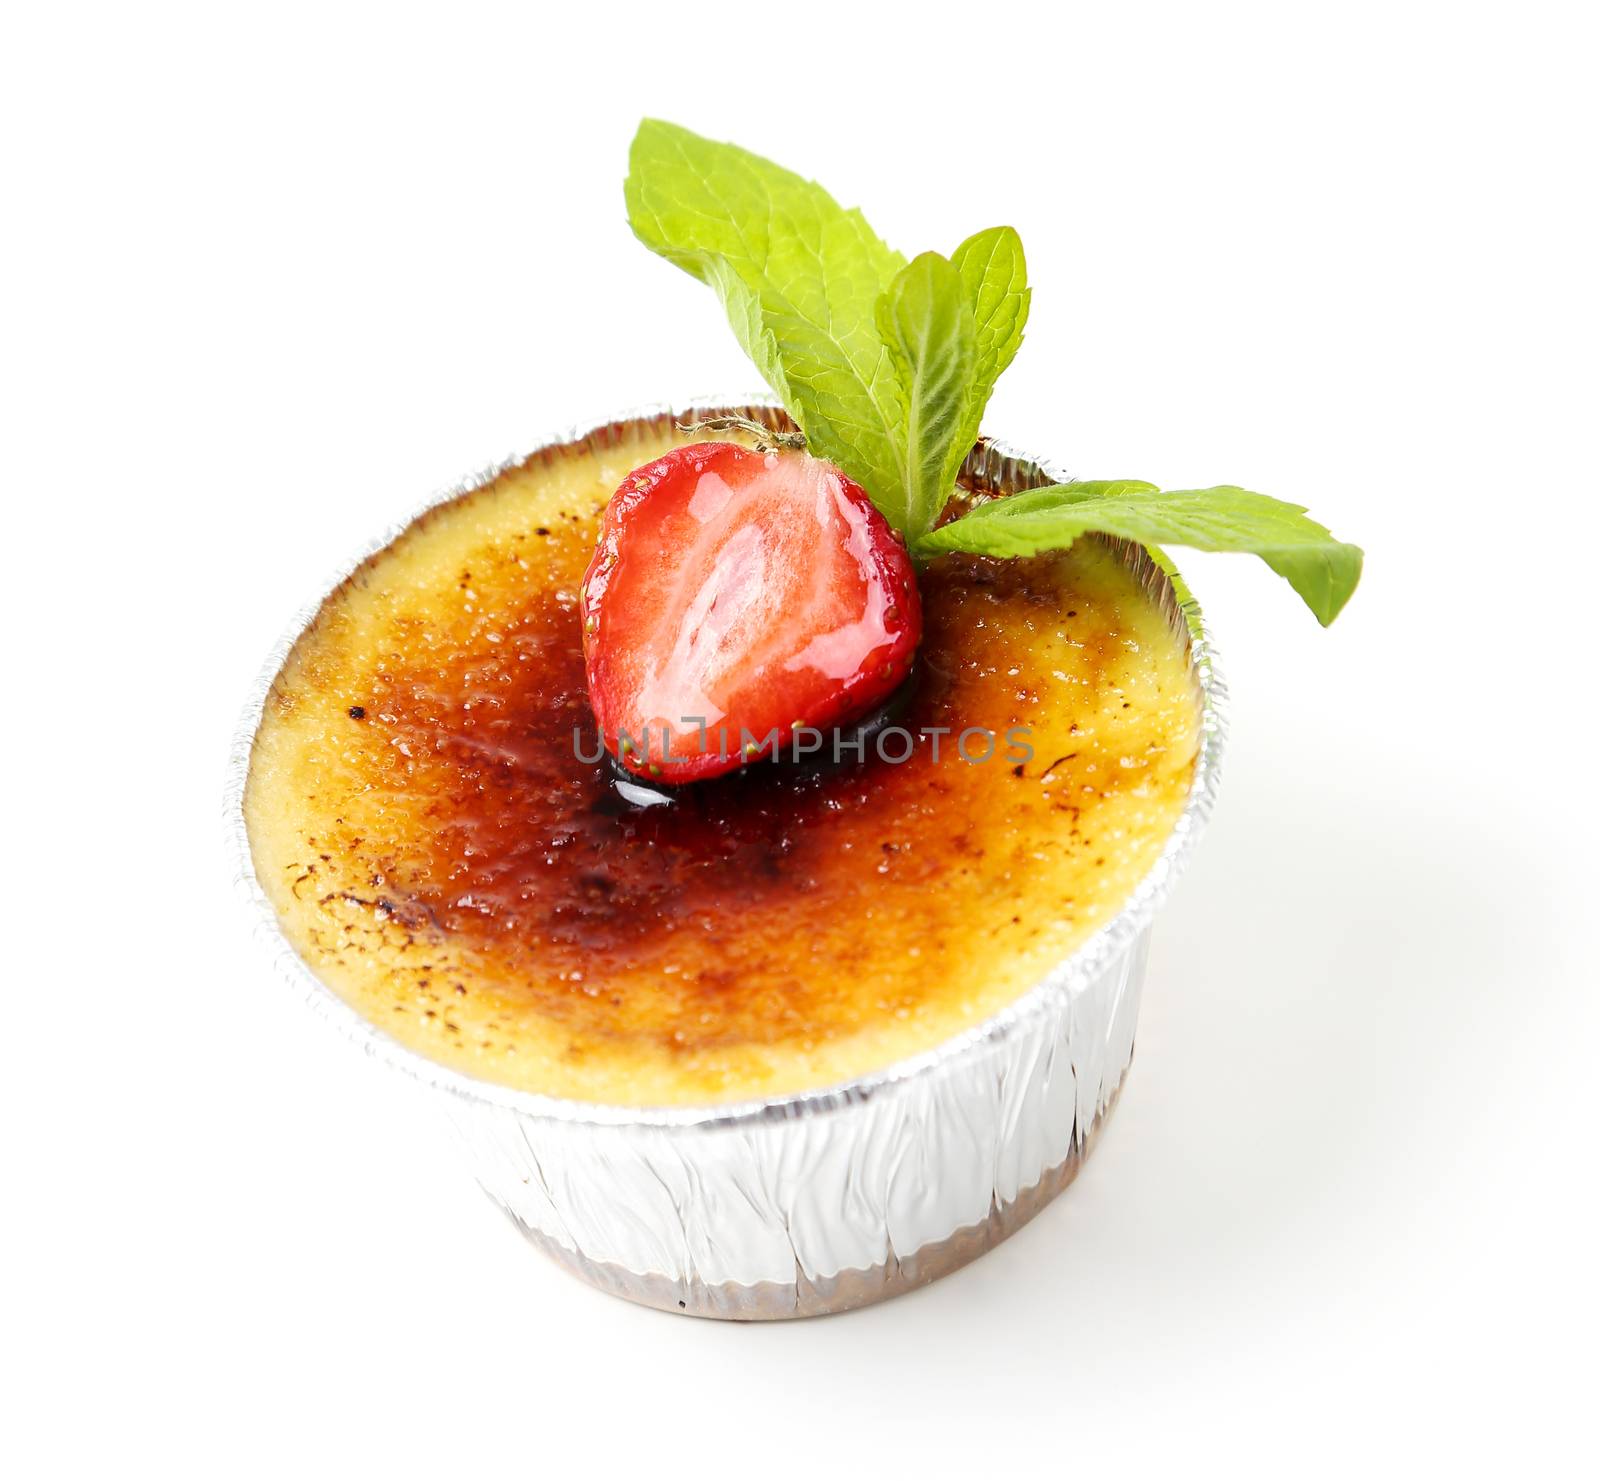 Dessert. Delicious creme brulee on the table